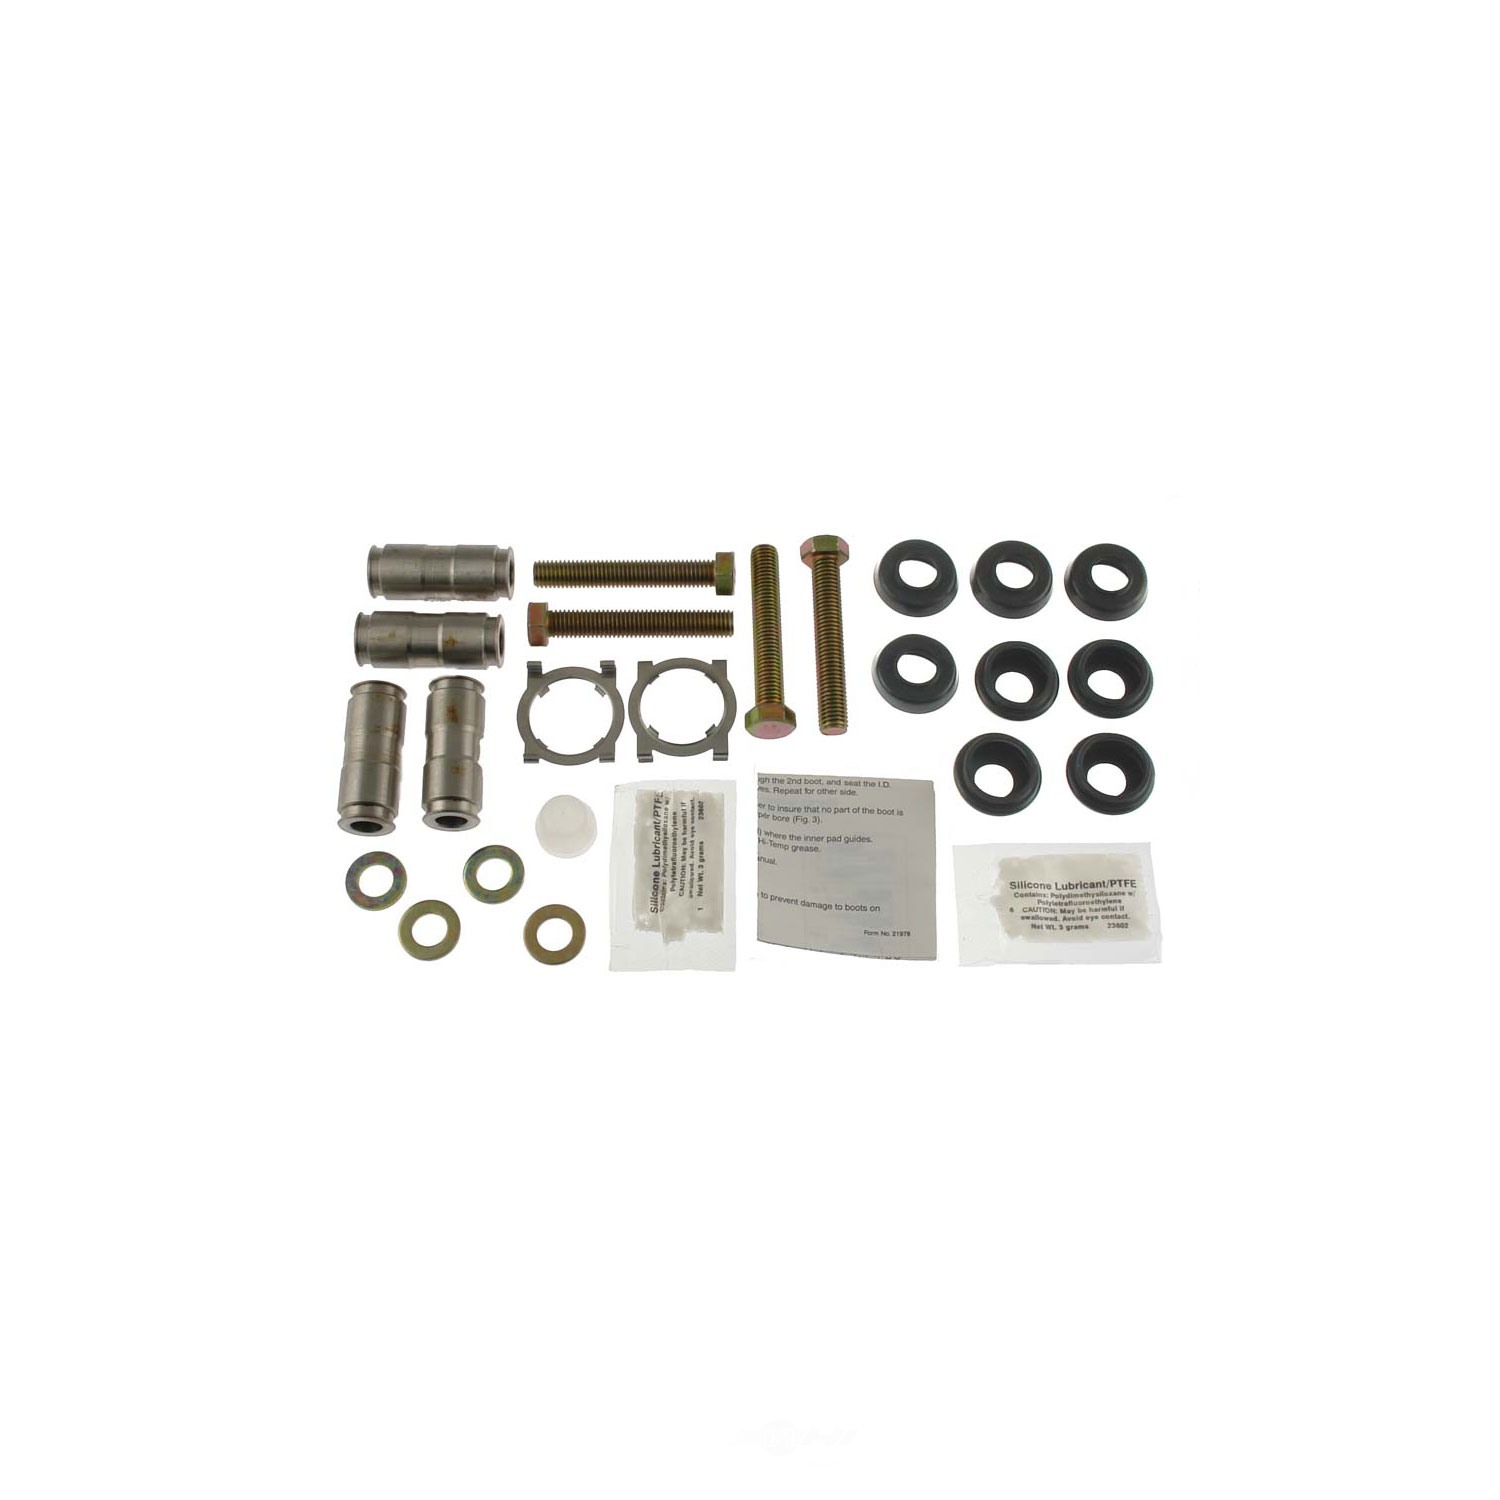 CARLSON QUALITY BRAKE PARTS - Includes Clips, Bushings, Bolts and Washers - CRL H5700